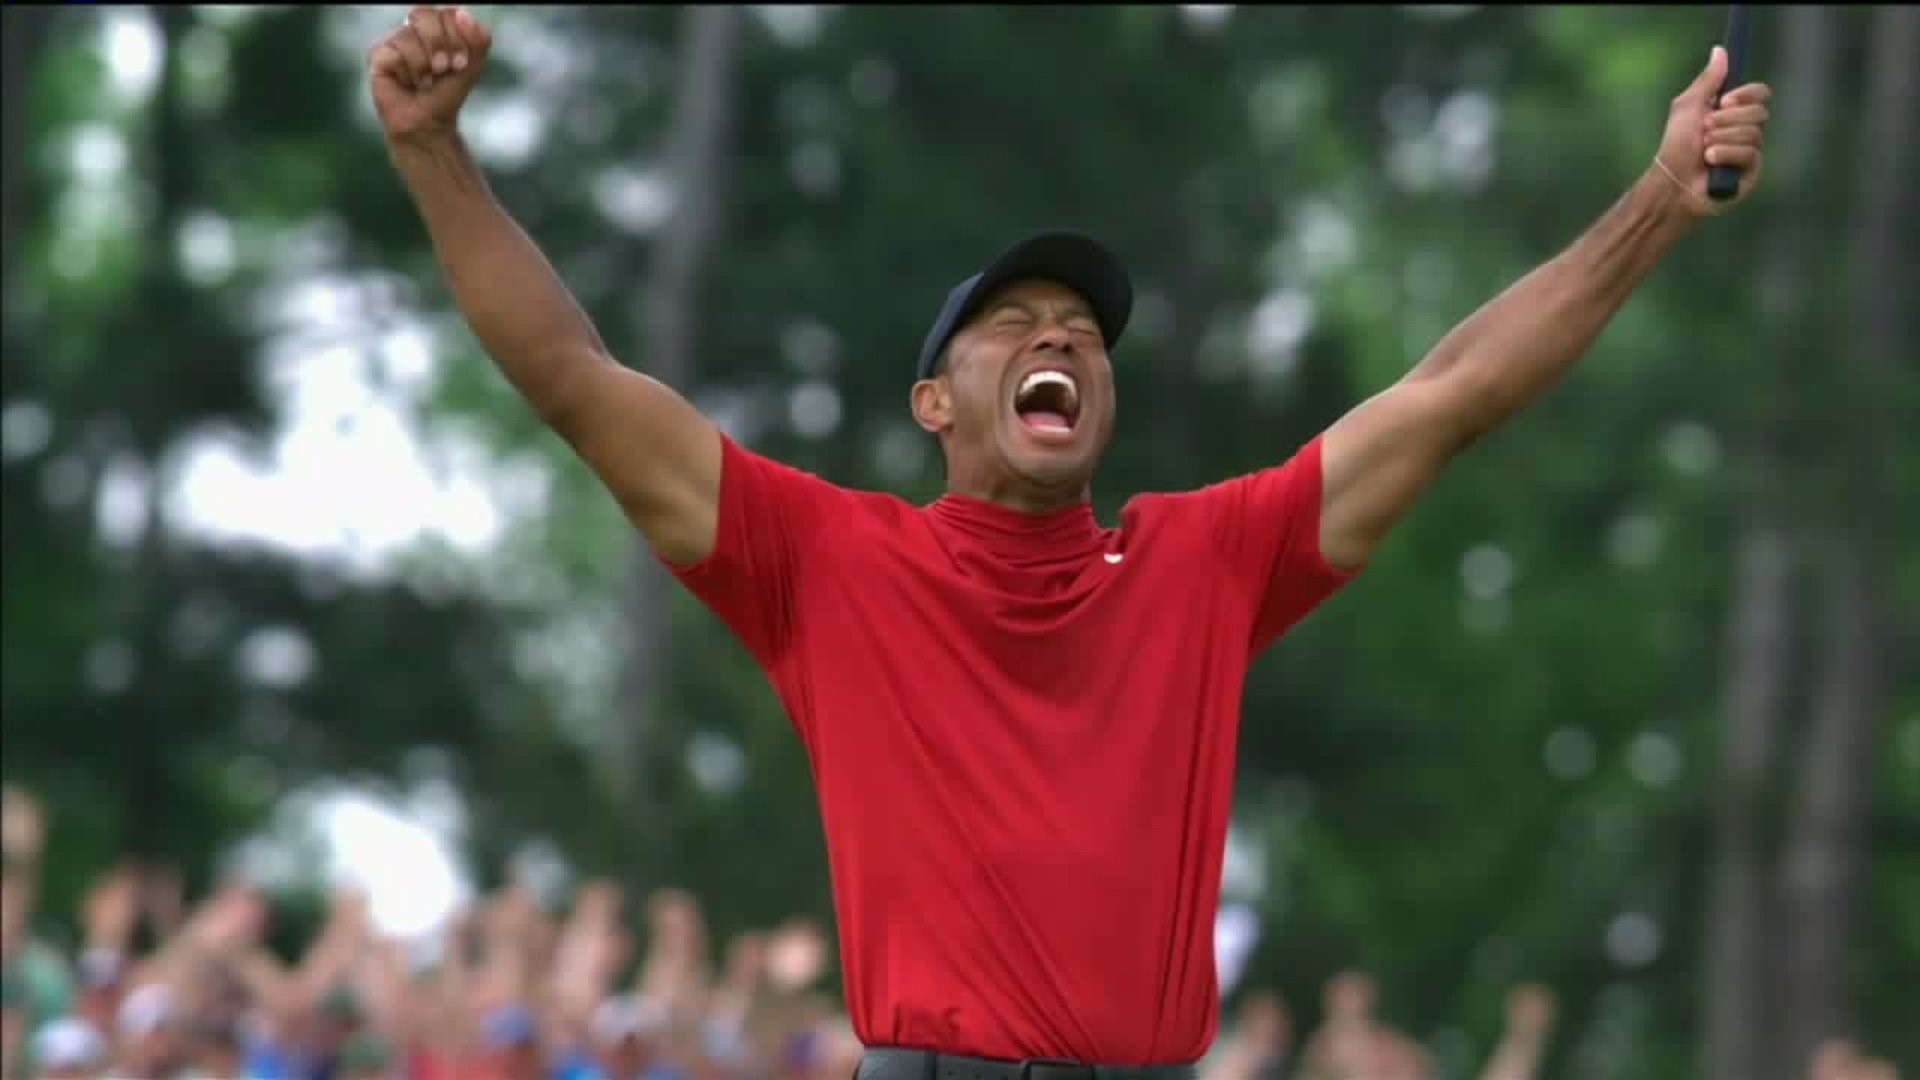 Local Golfers Marvel at Tiger Woods` Comeback Story